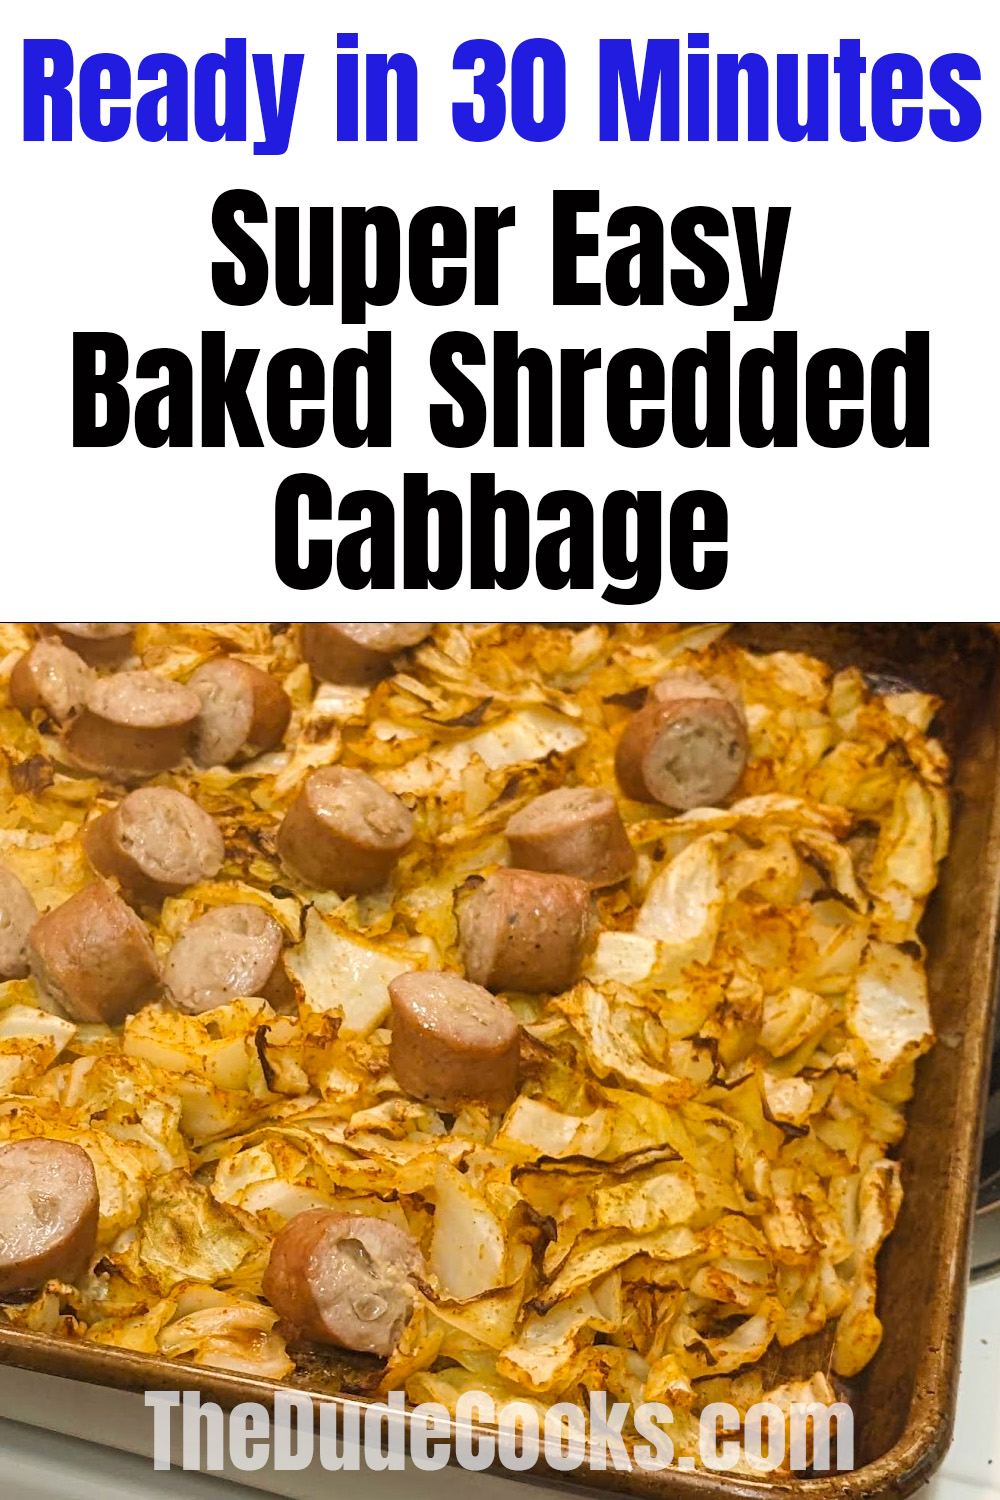 baked cabbage recipe